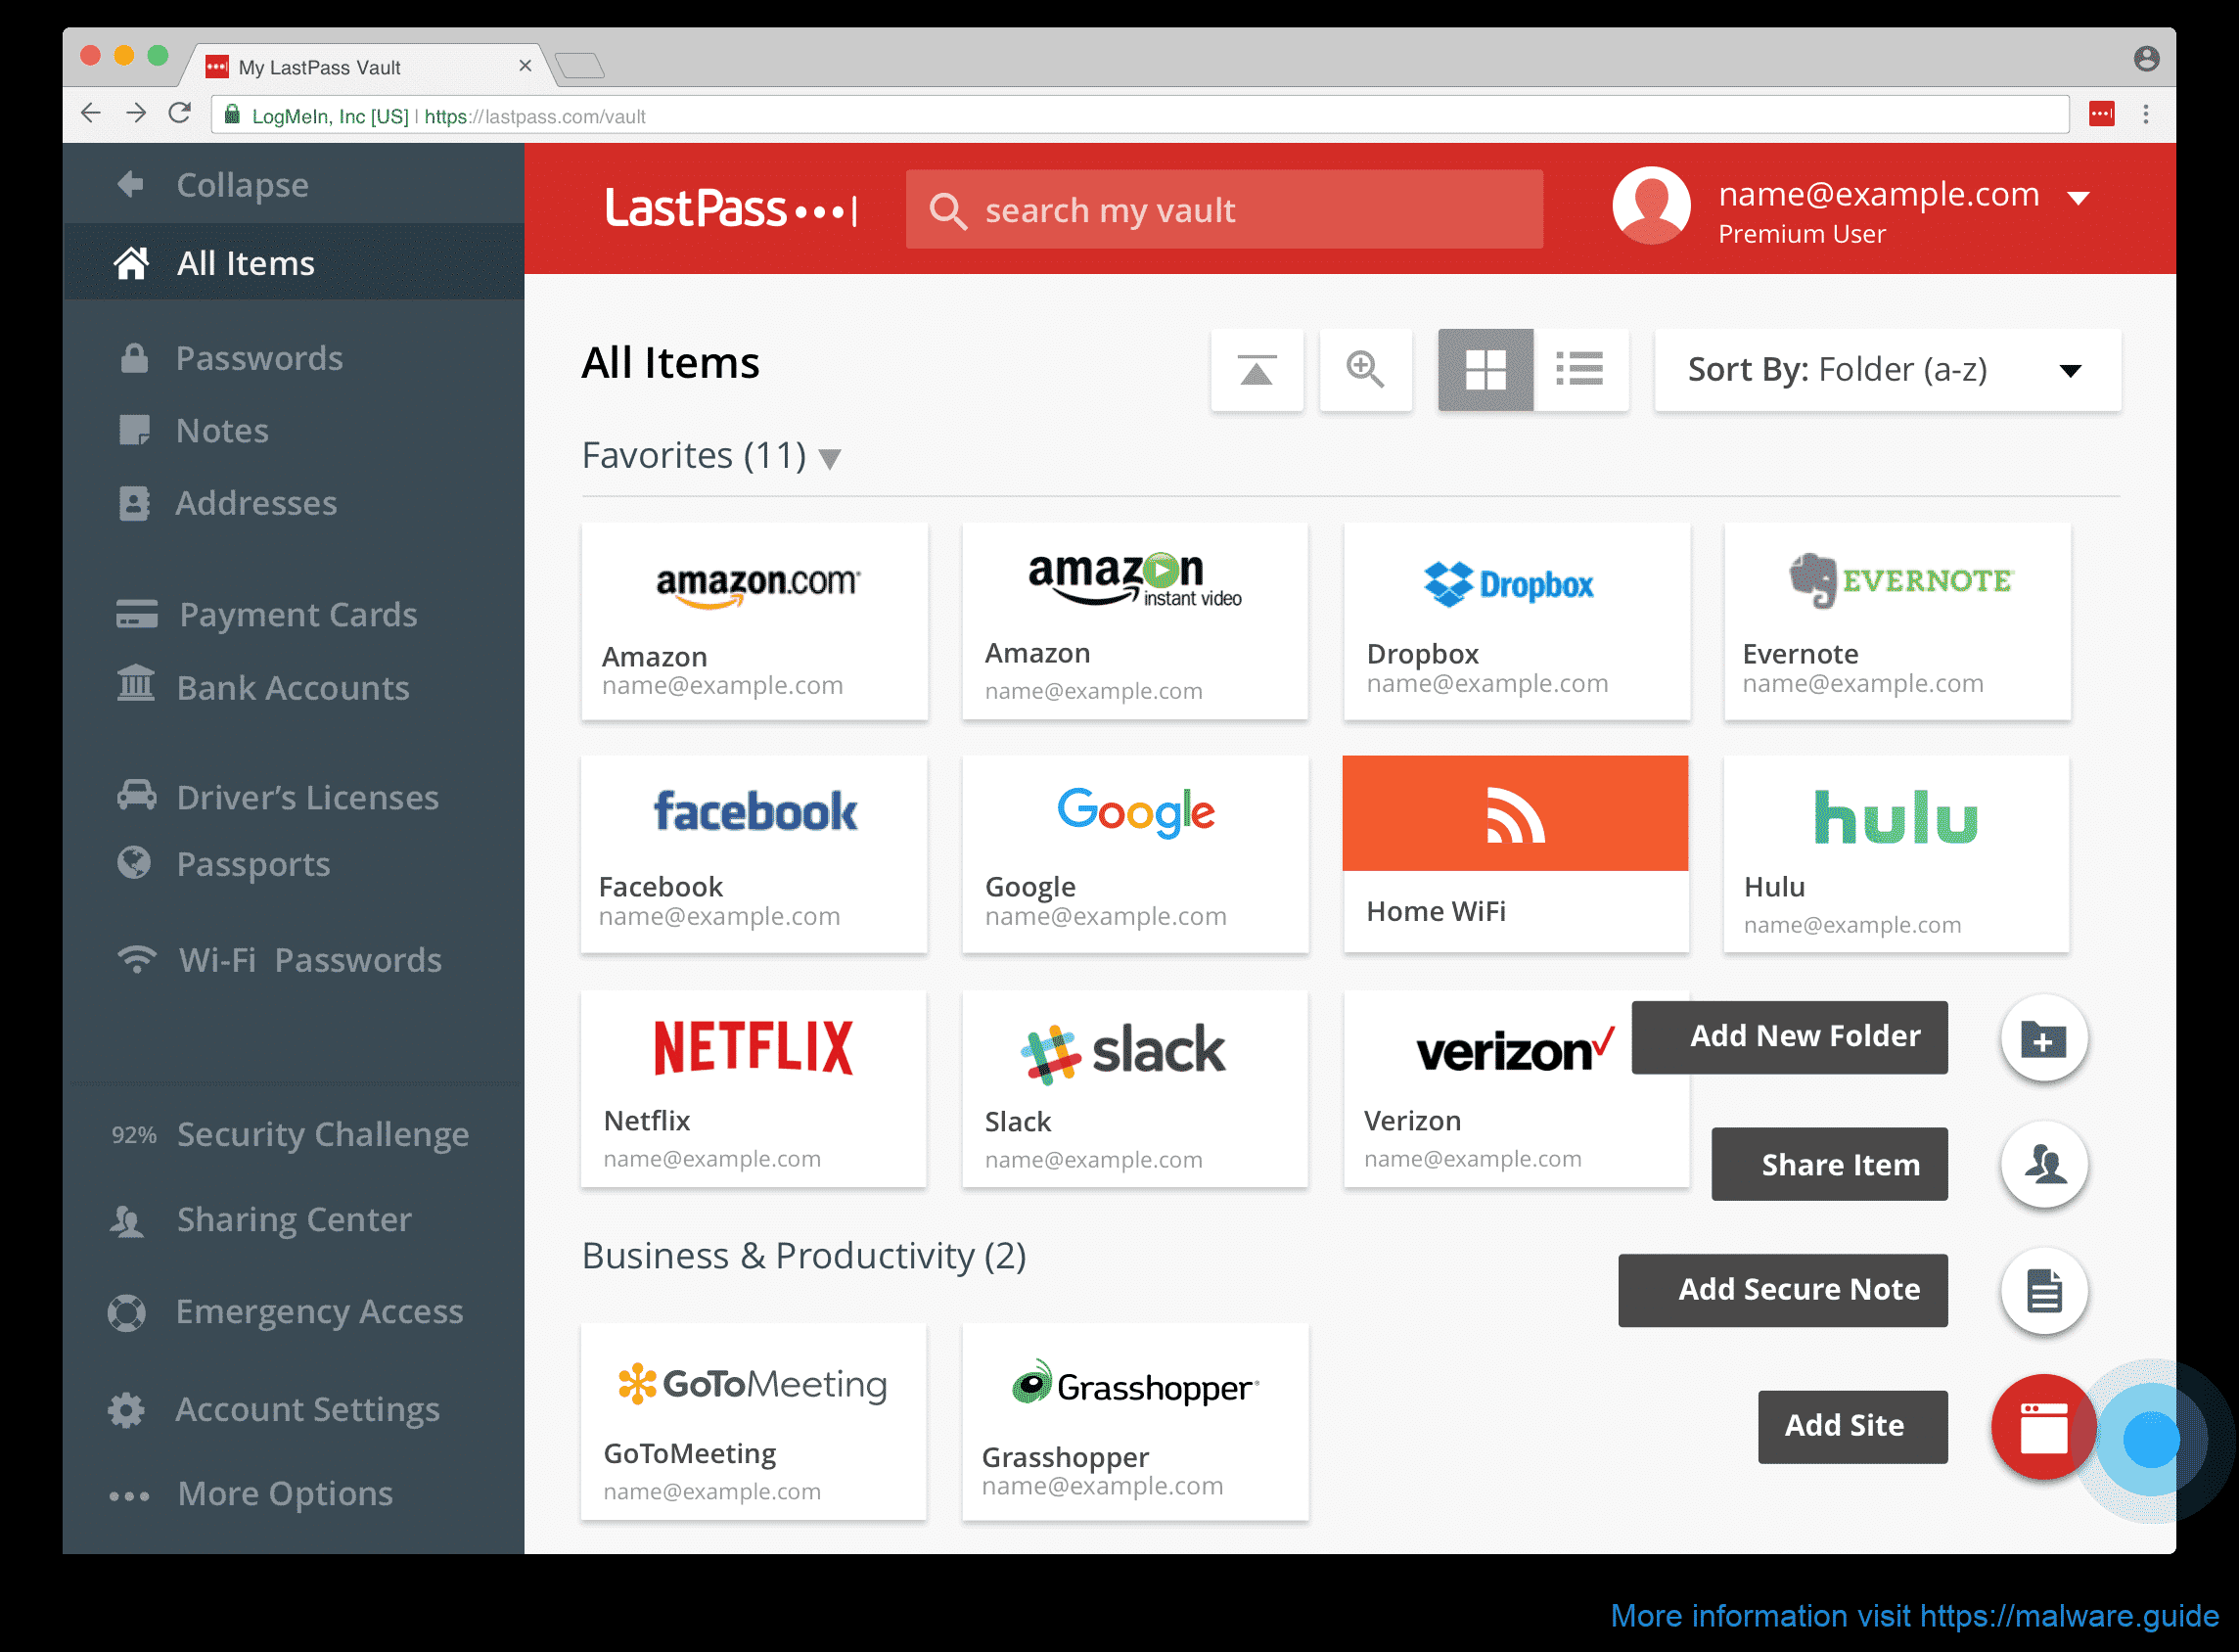 LastPass Claims to Generate Abuse Alerts Itself 1